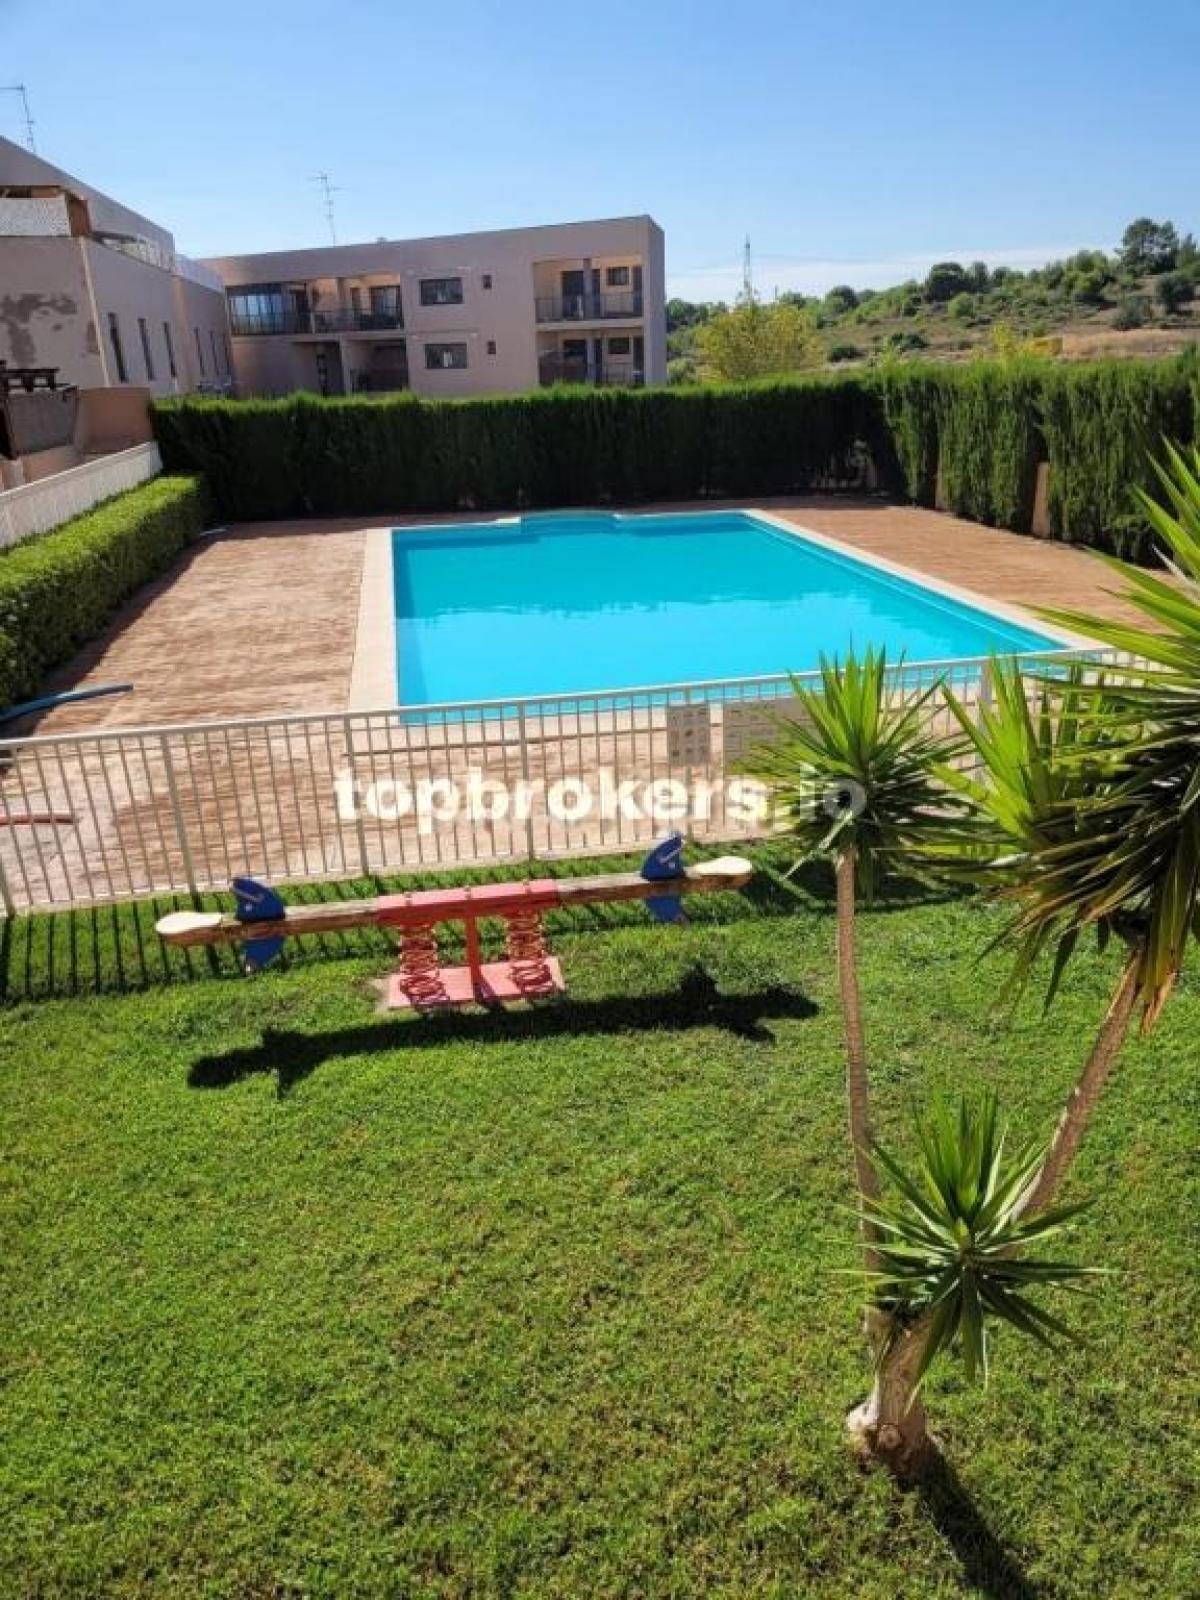 Picture of Home For Sale in Betera, Valencia, Spain